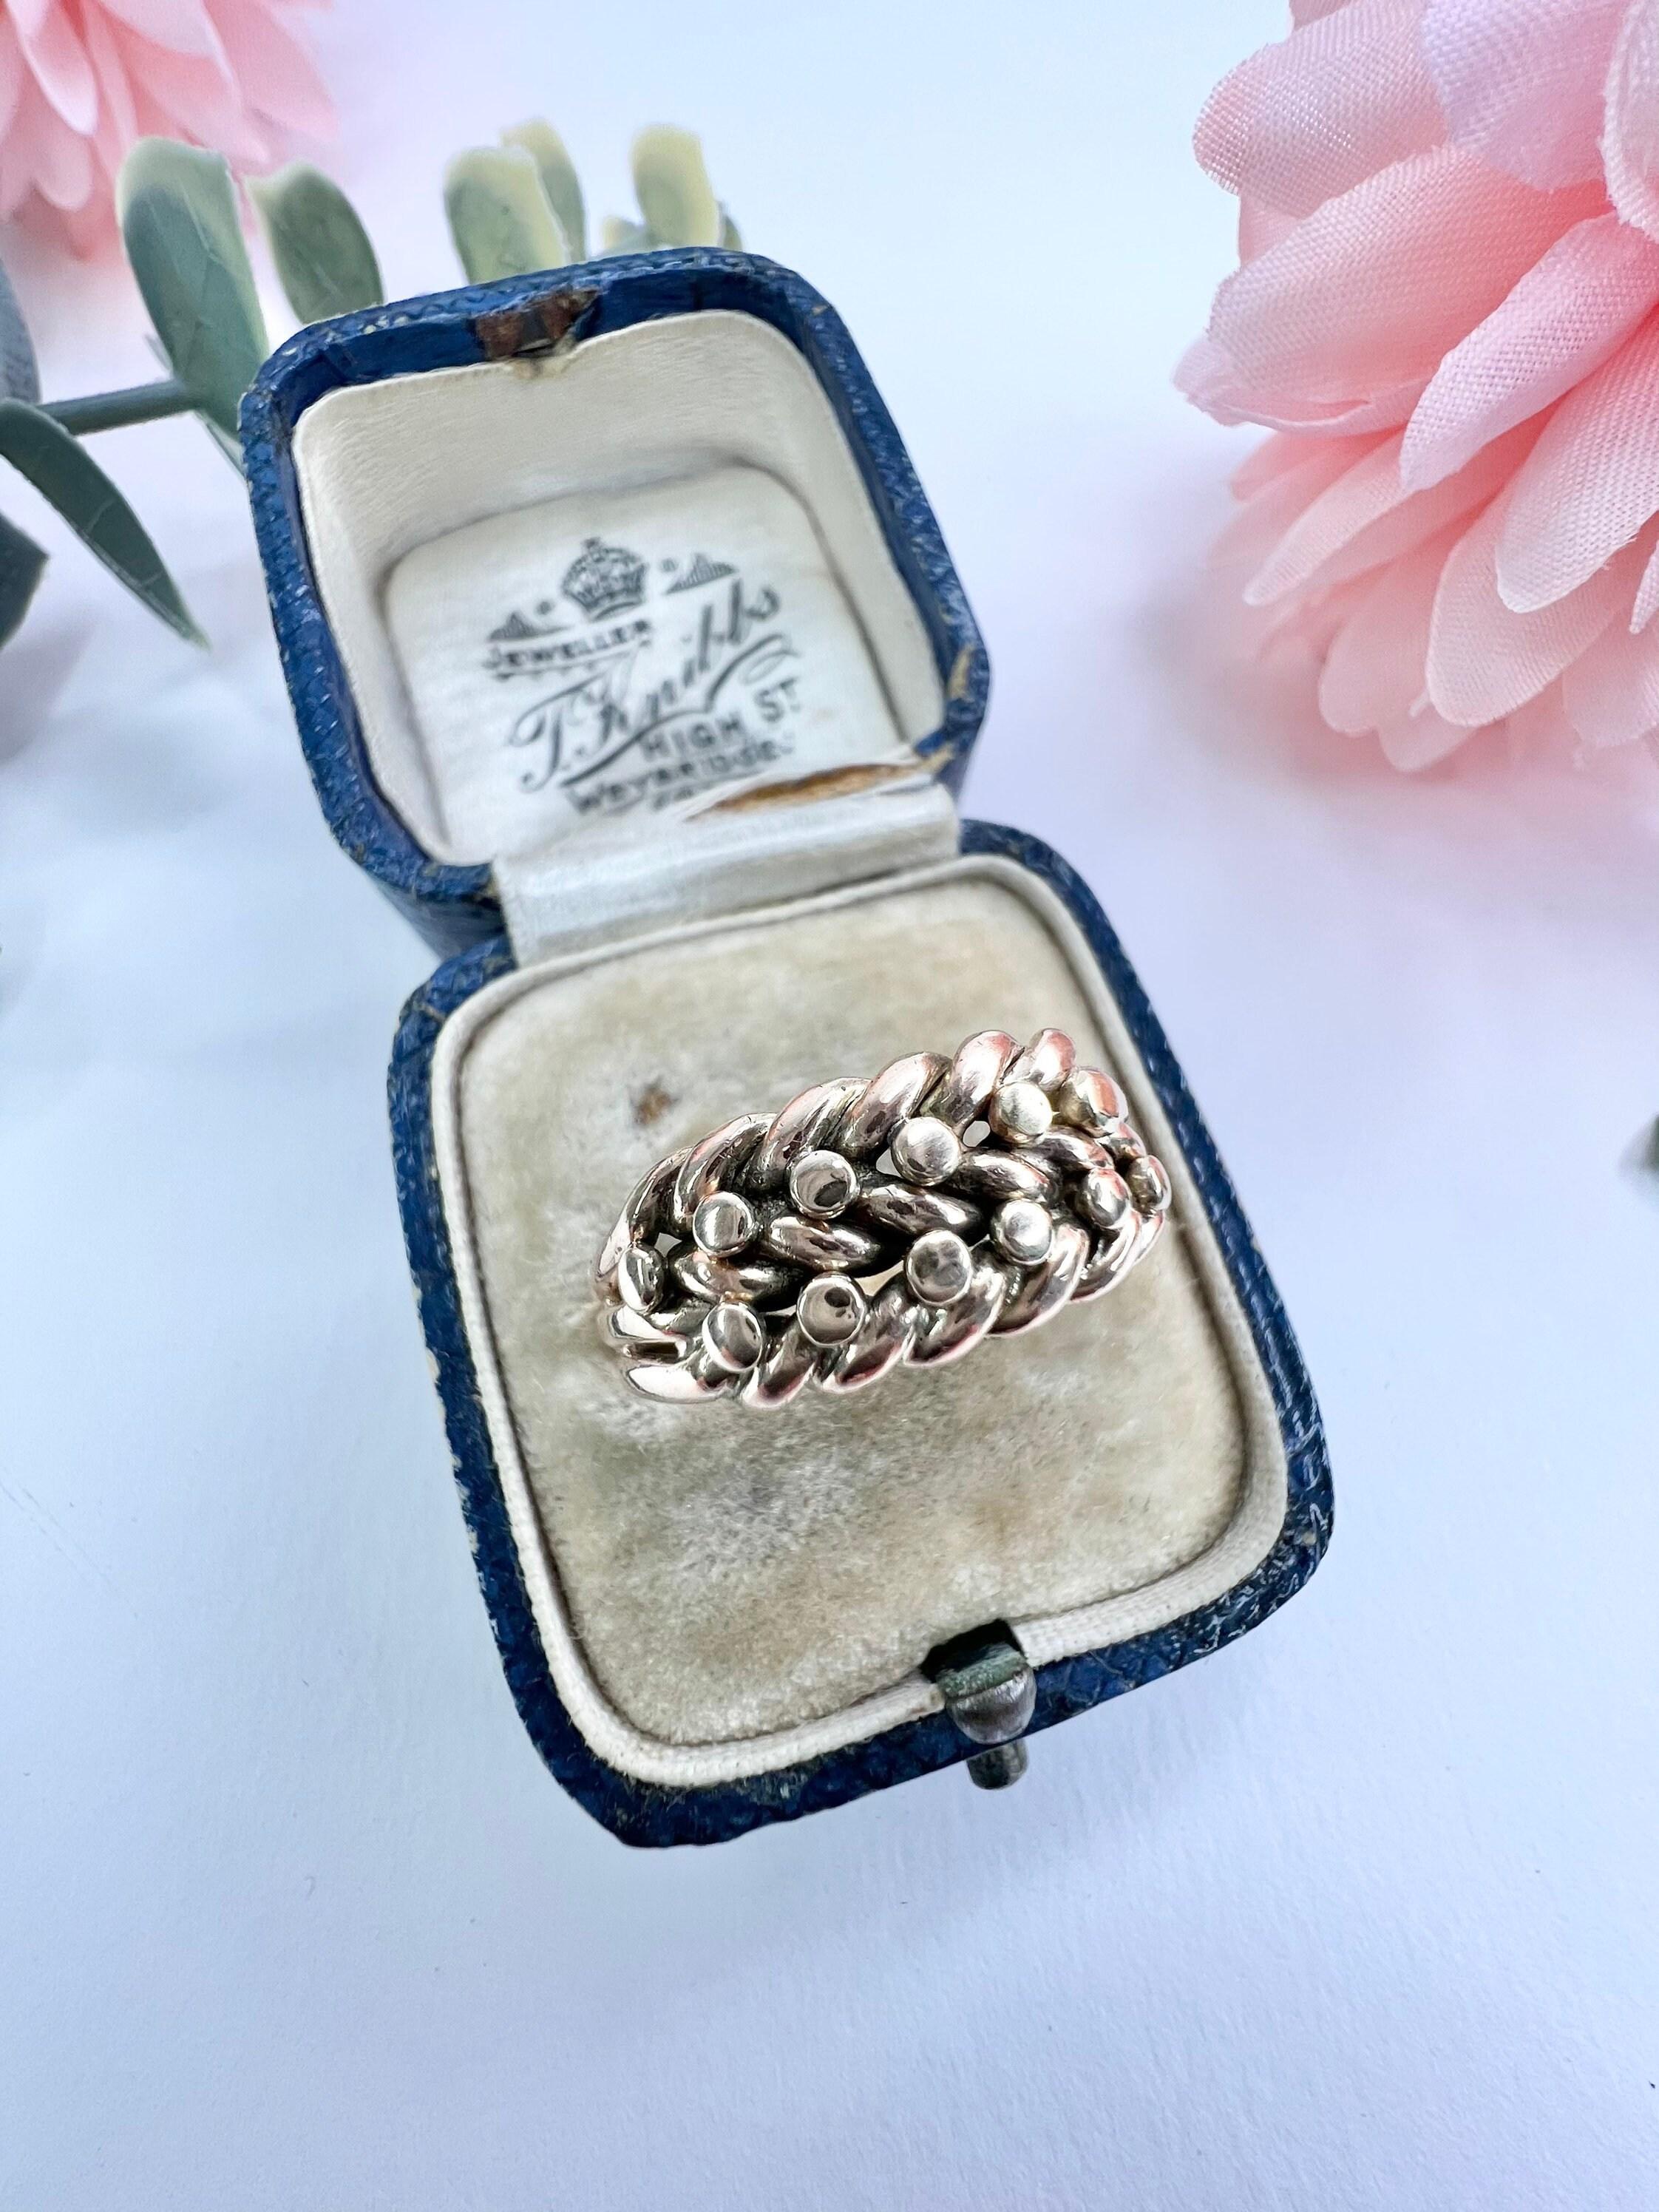 Antique Keepers Ring 

9ct Rose Gold Stamped 

Hallmarked Chester 1901

Makers Mark G V E B

Lovely, Chunky Edwardian Two Row Keepers Ring. A Keeper Ring Was Traditionally Used Alongside Another More Valuable Ring To Keep It Securely In Place.